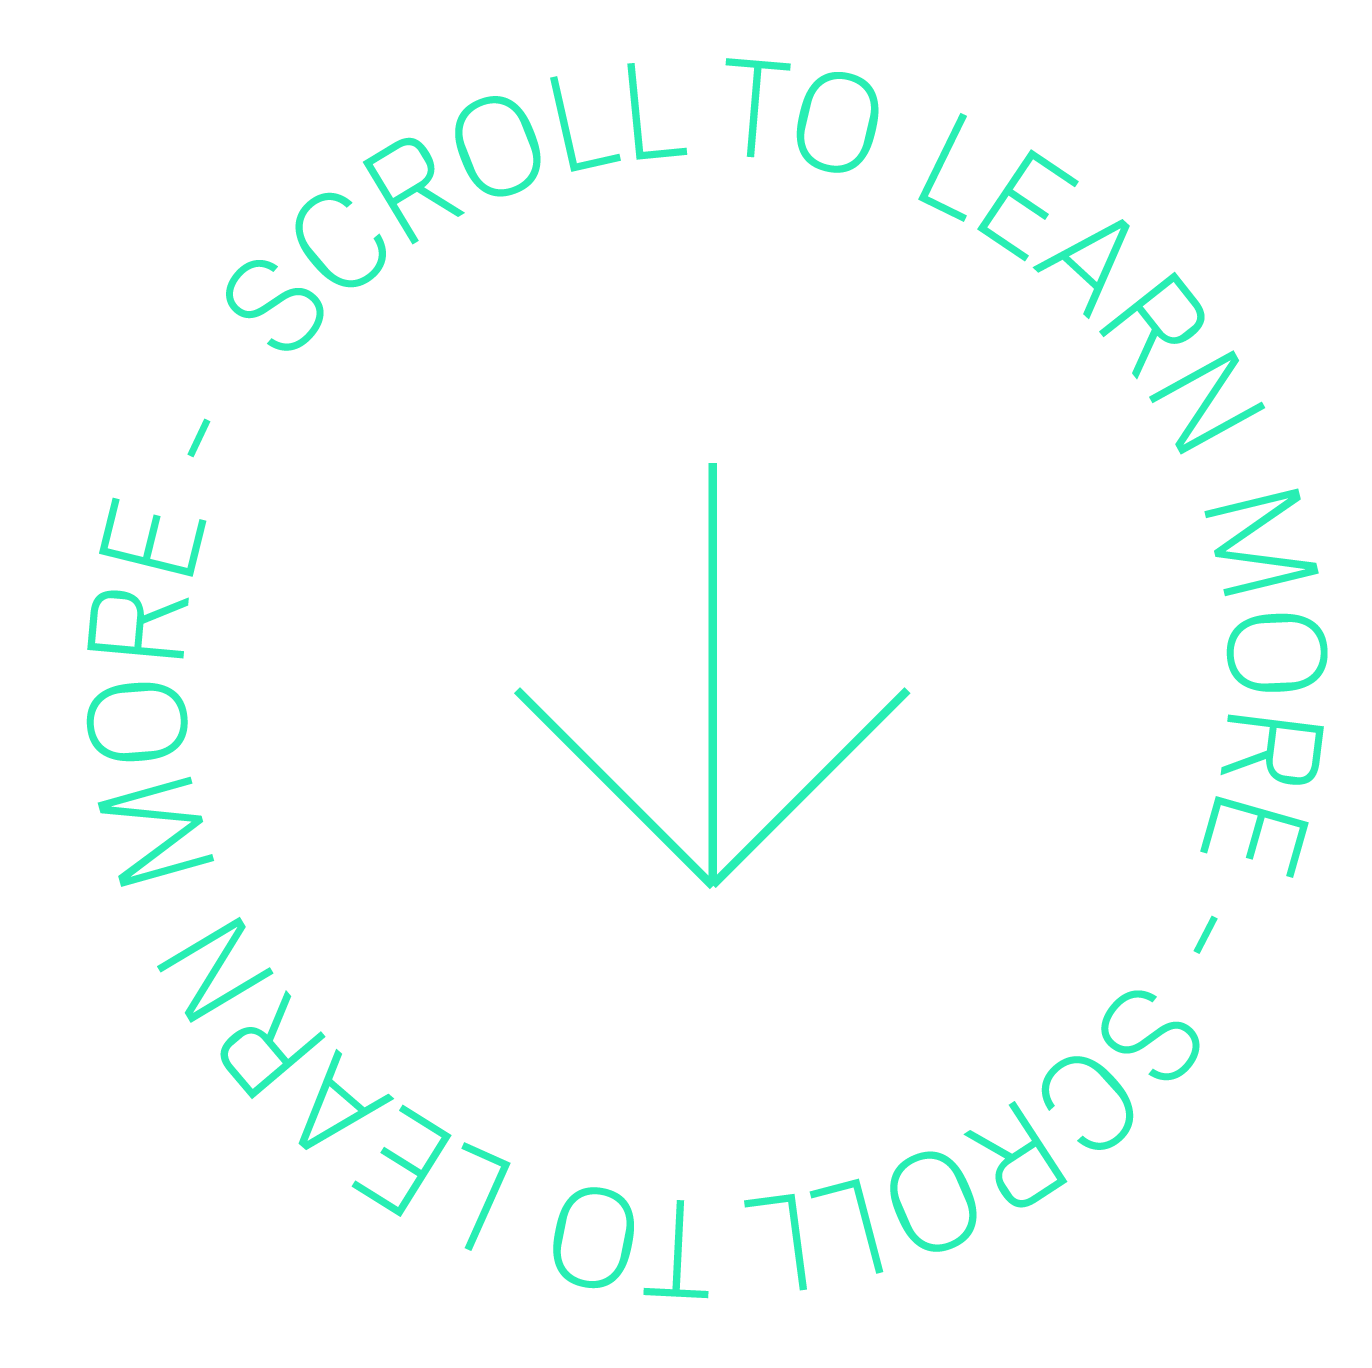 Scroll To Learn More 01